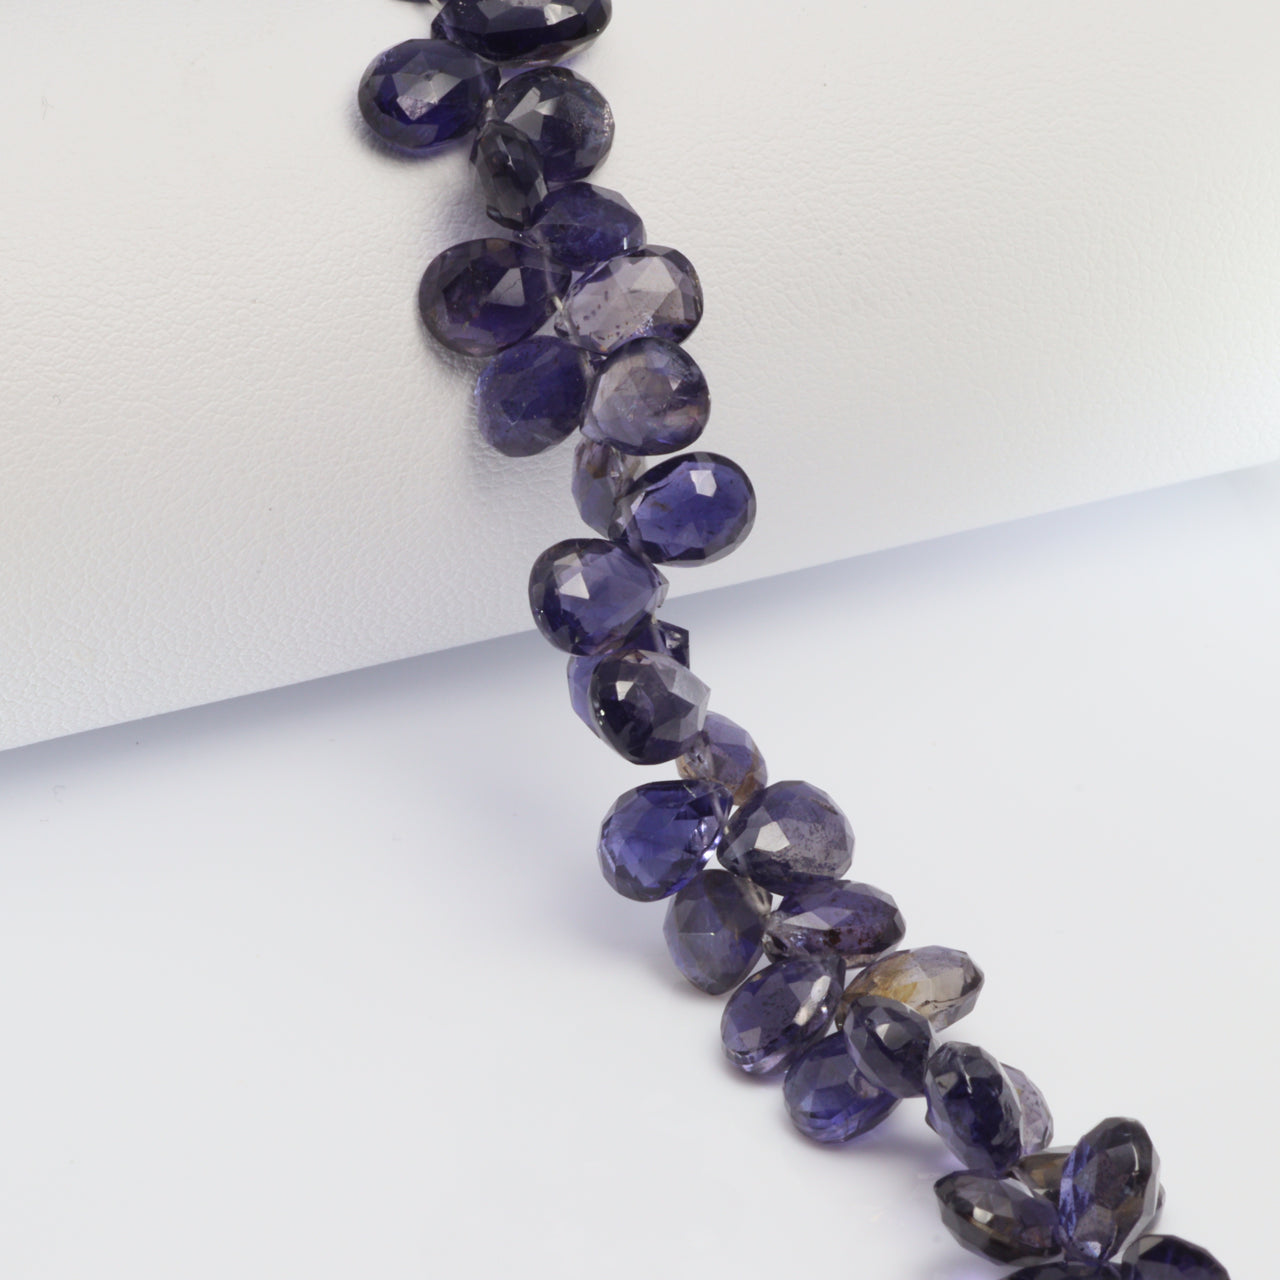 Blue Iolite 7x5mm Faceted Pear Shaped Briolettes